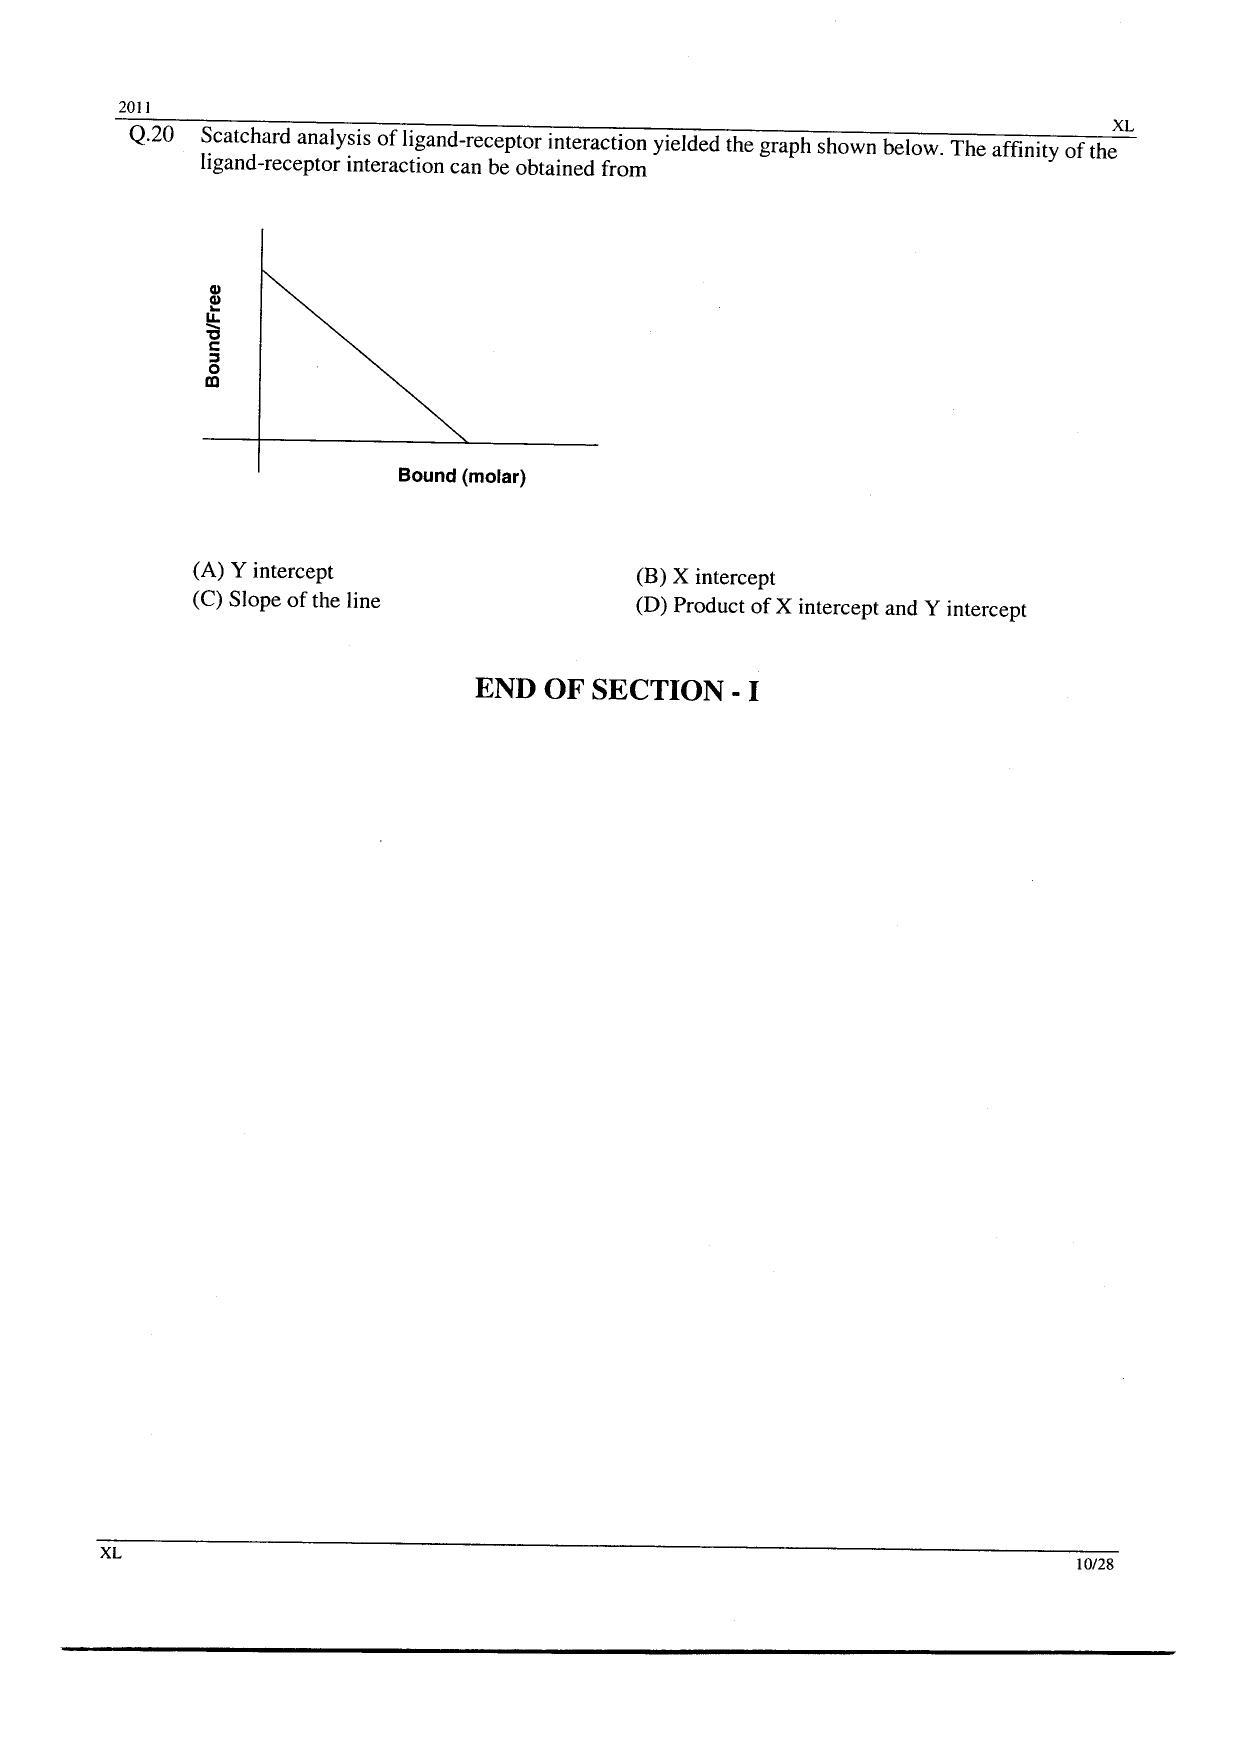 GATE 2011 Life Sciences (XL) Question Paper with Answer Key - Page 10